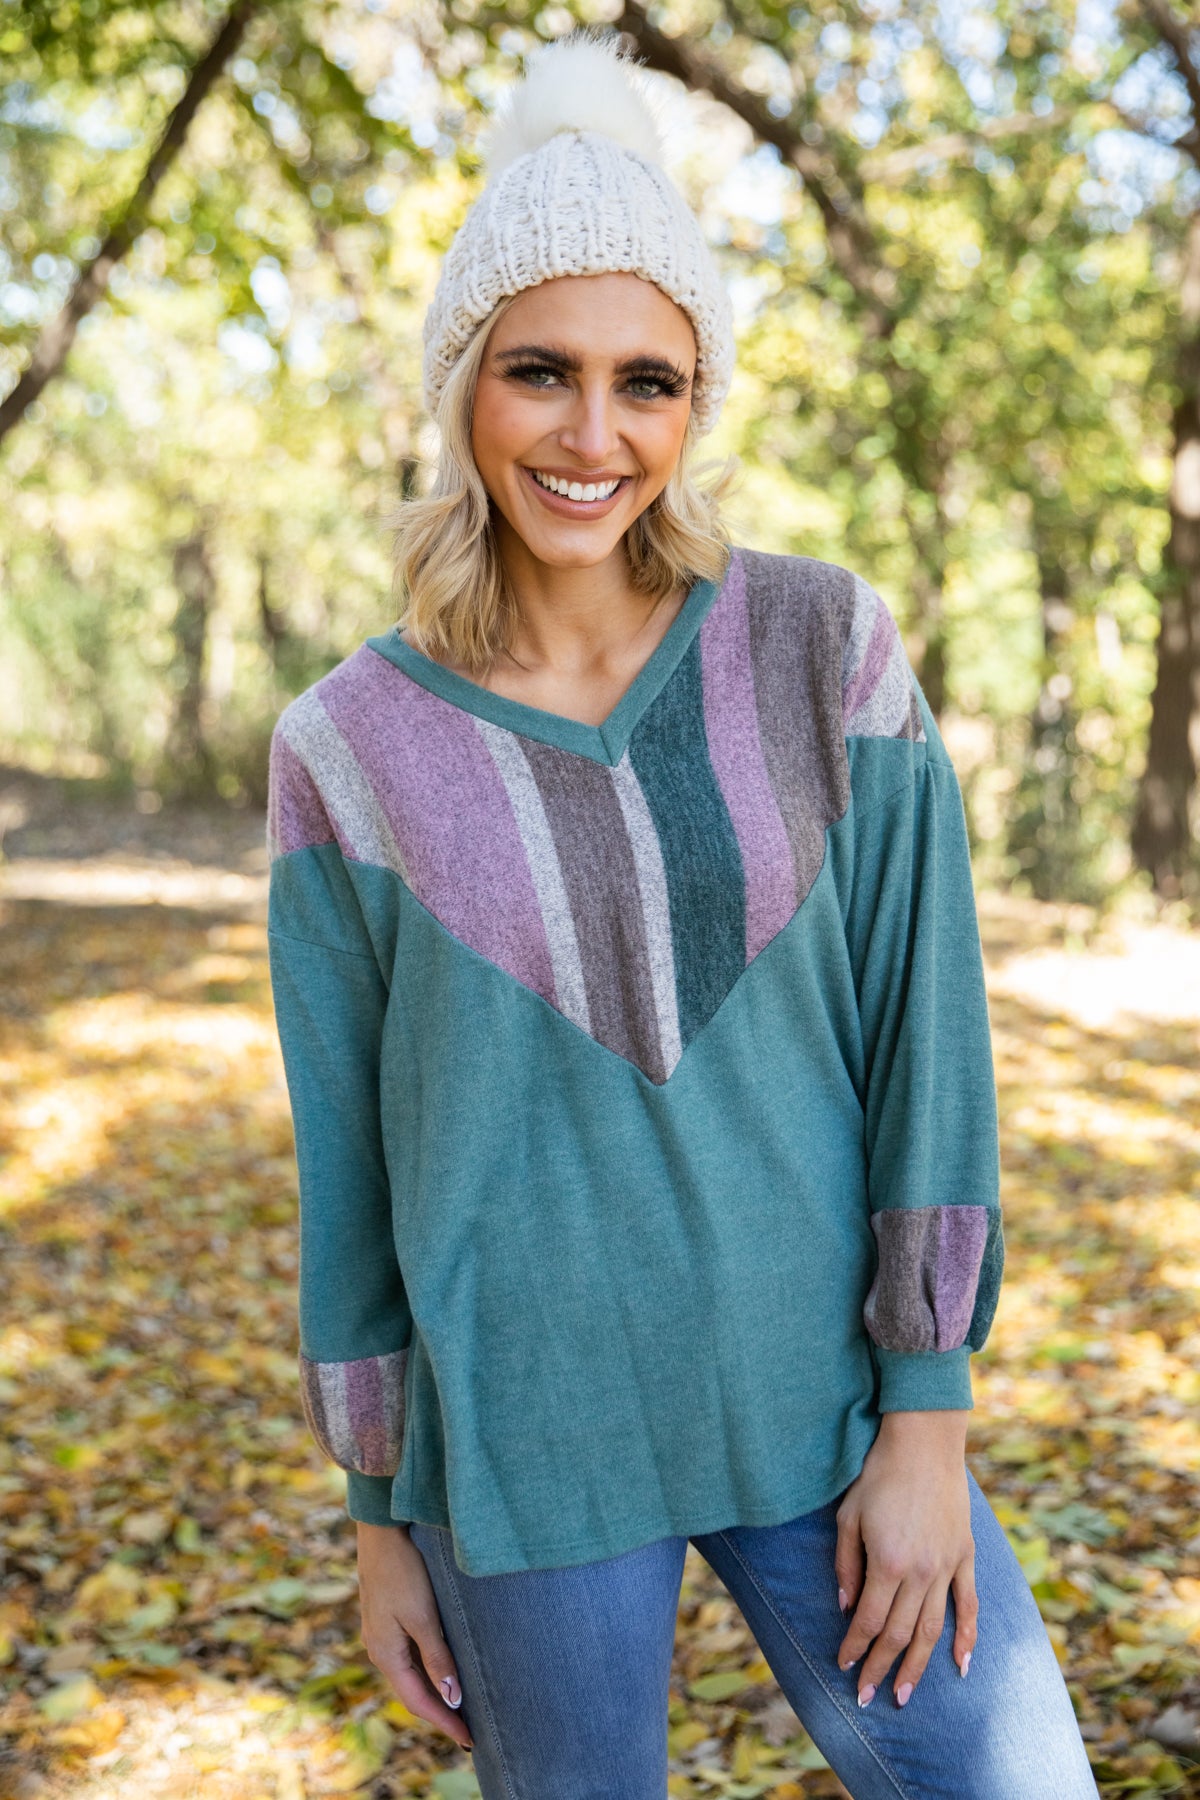 Emerald Green and Mauve Colorblock Chevron Top - Filly Flair